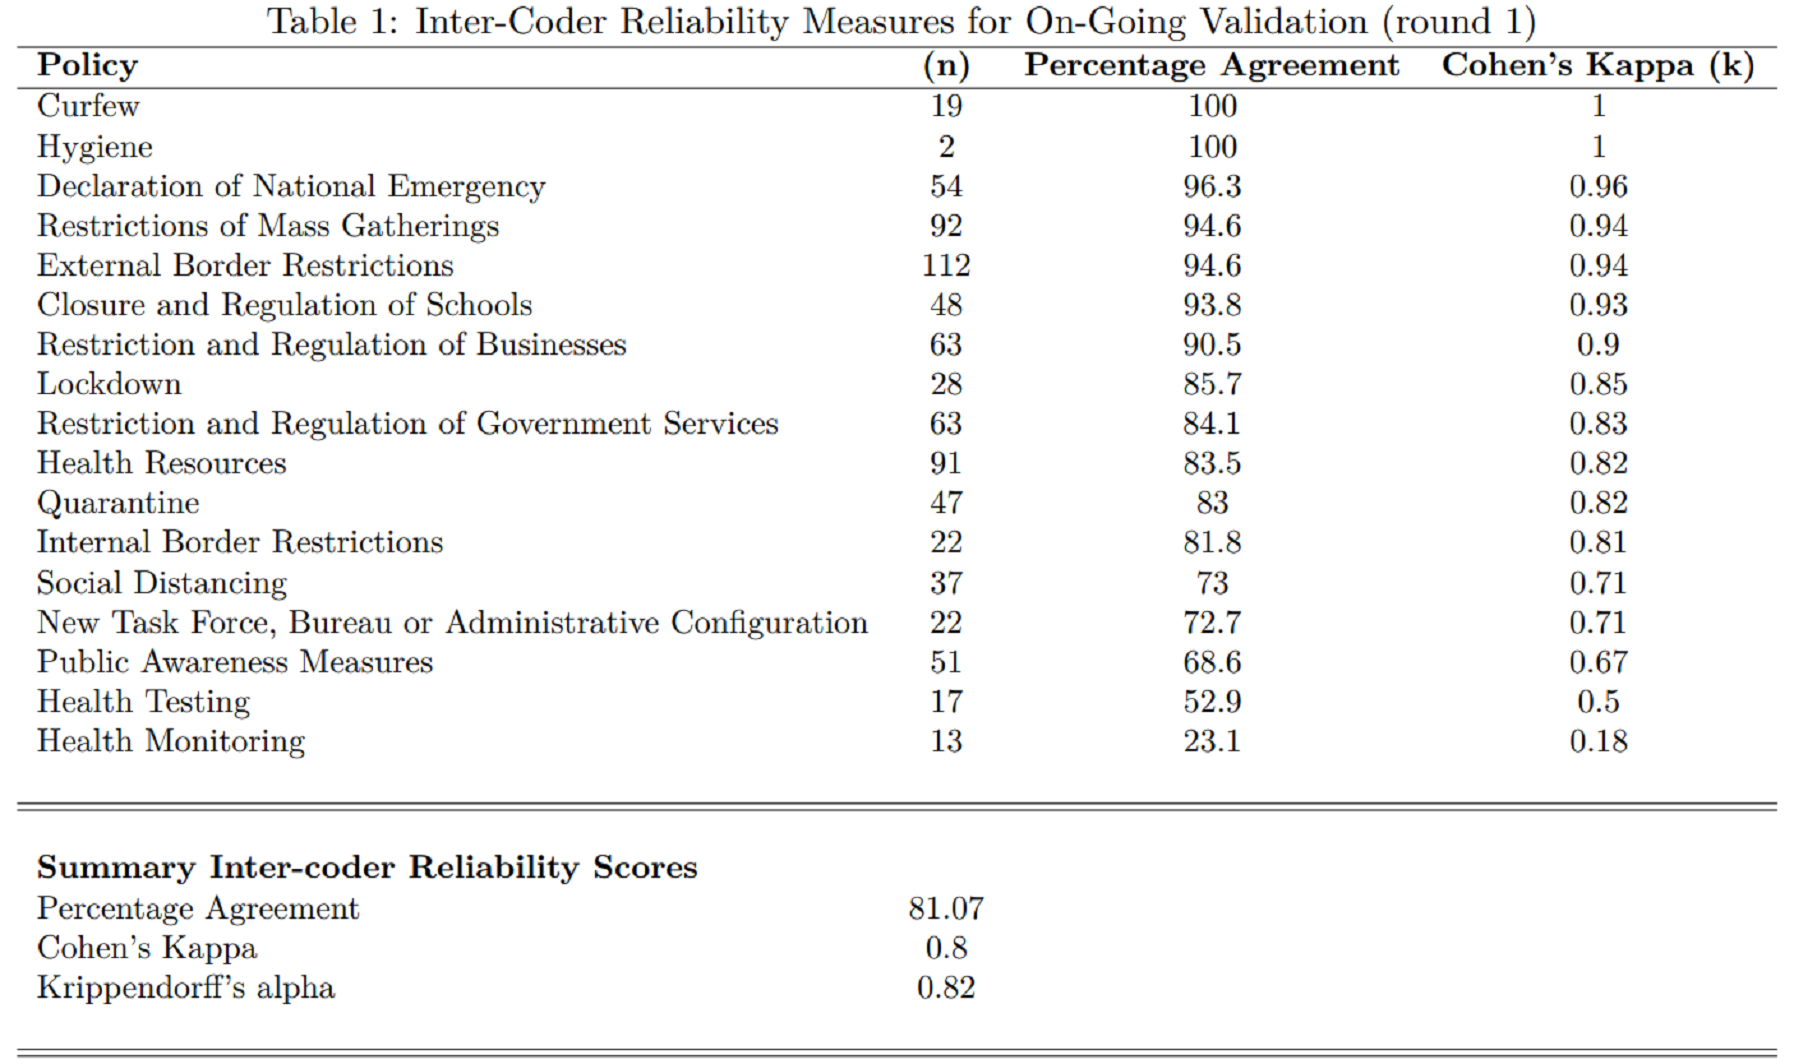 Table of inter-coder reliability measures for on-going validation